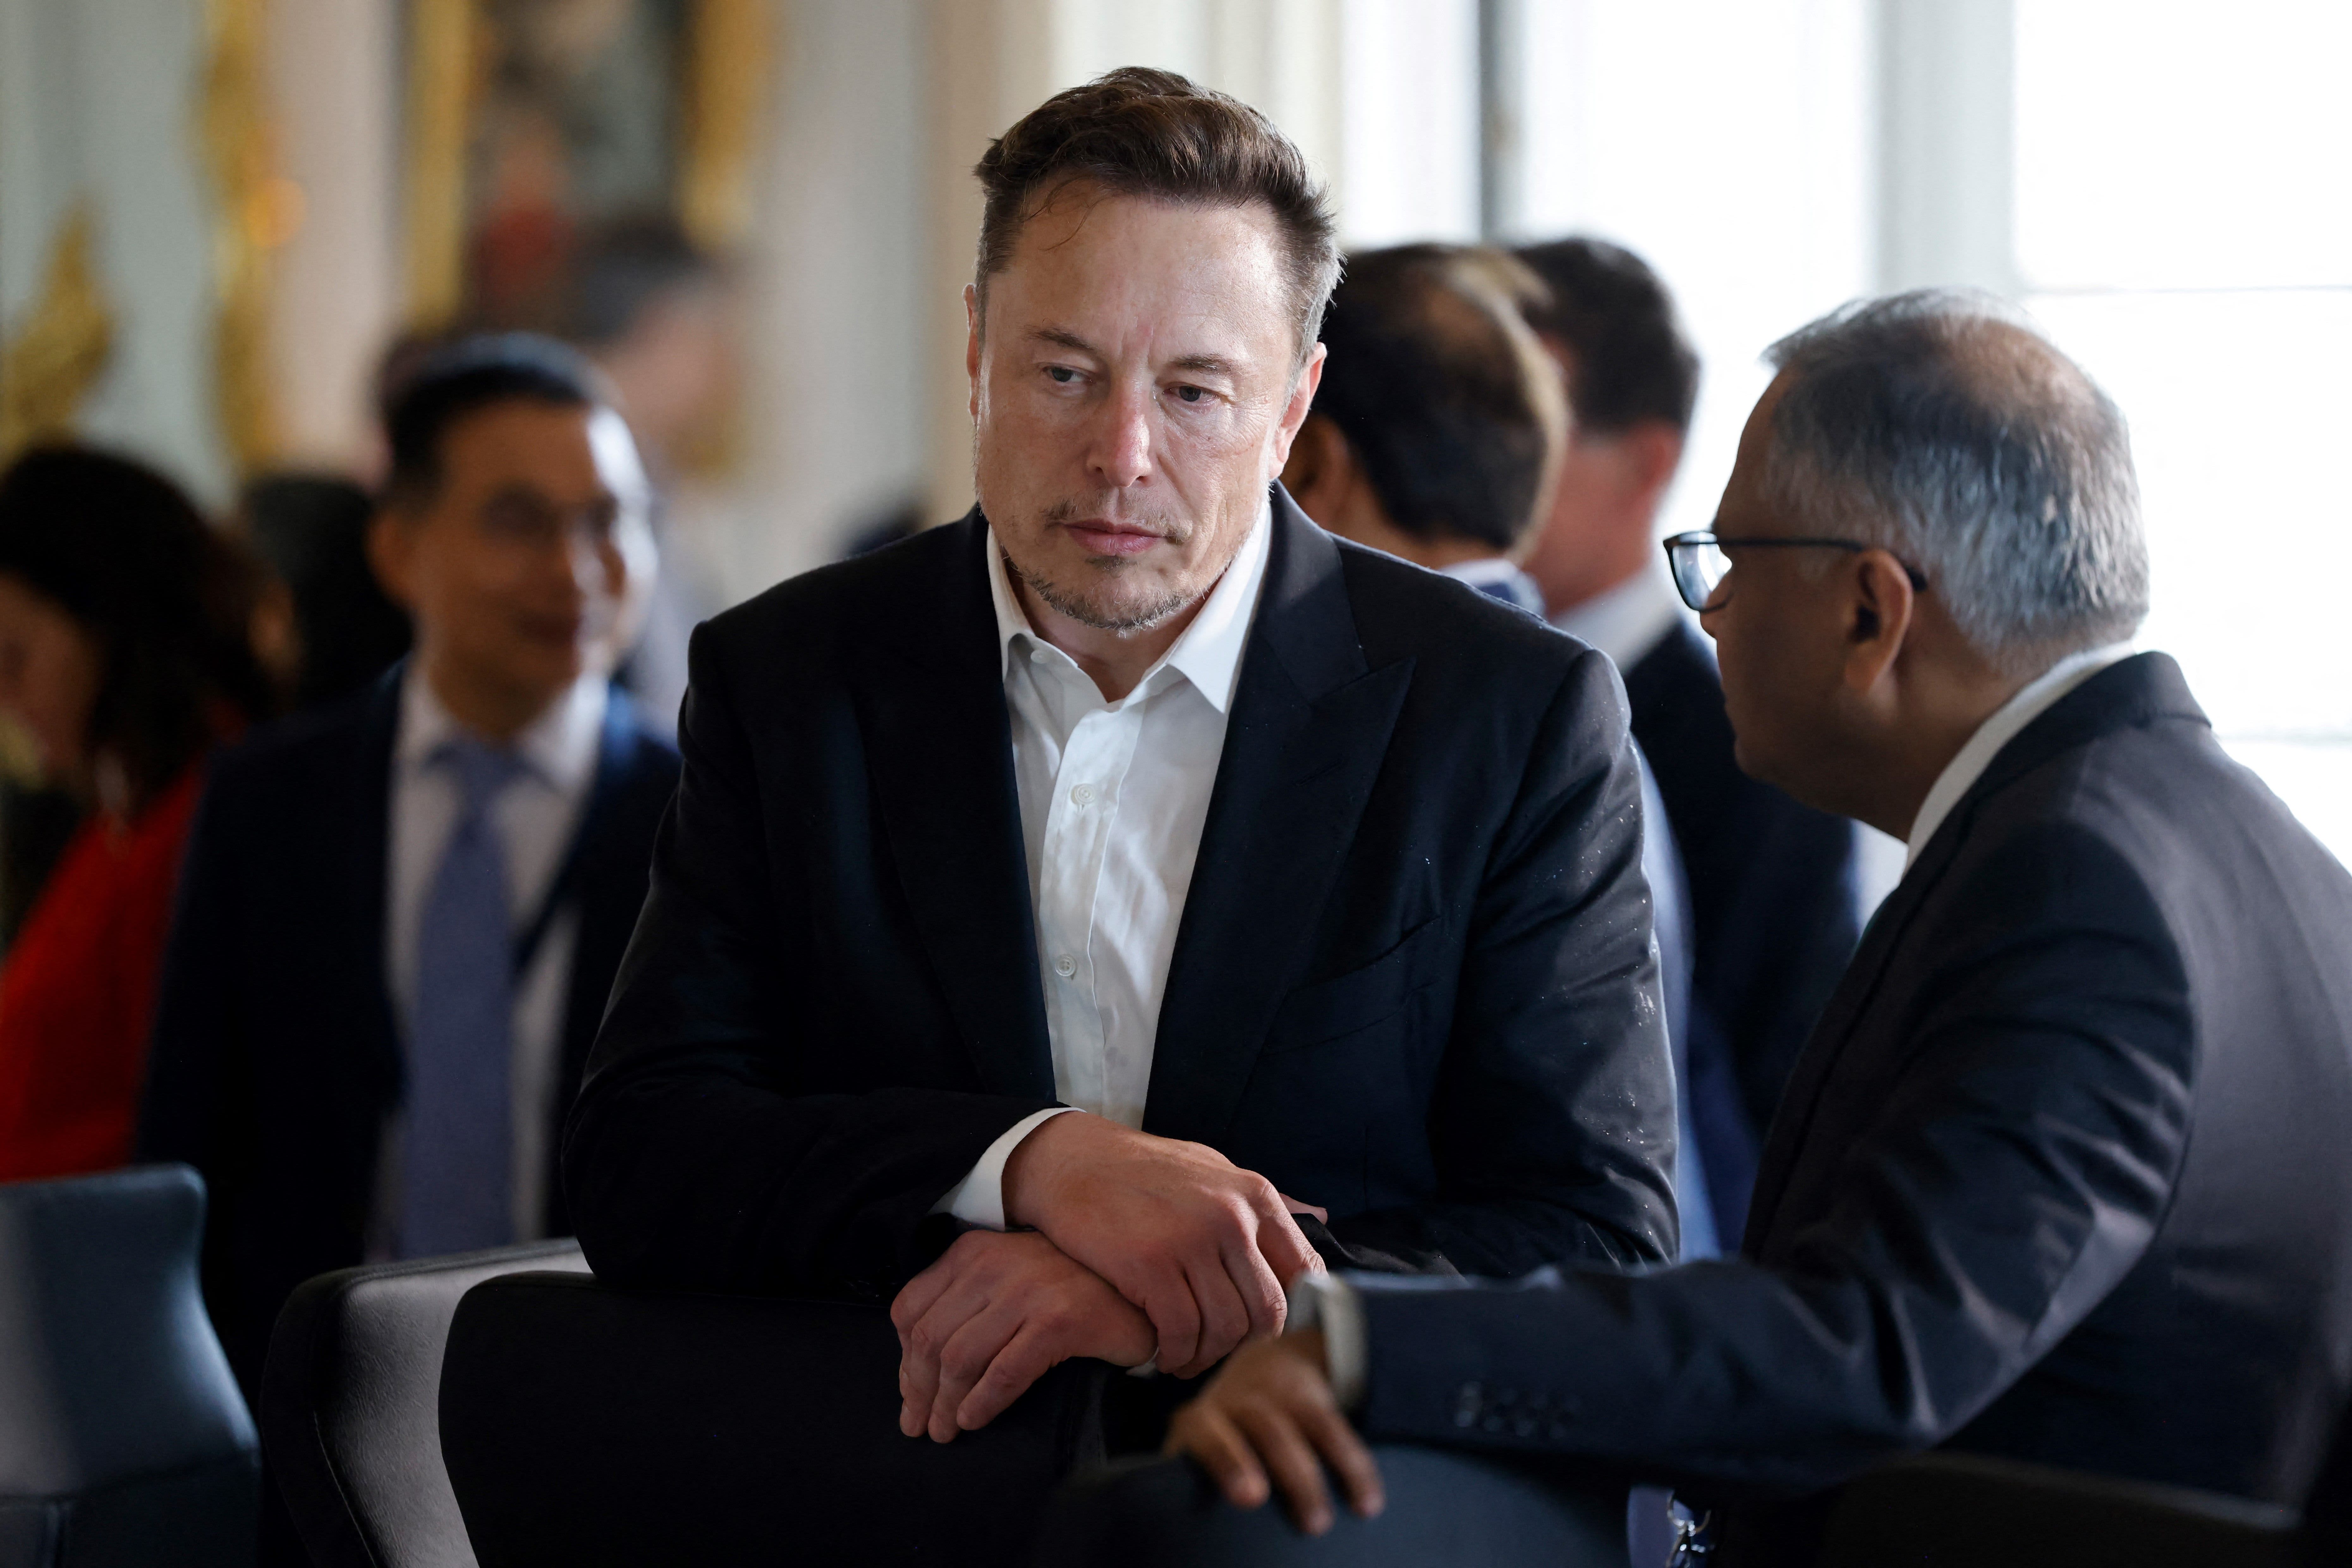 Tesla CEO Elon Musk says in an email that he must approve all hires